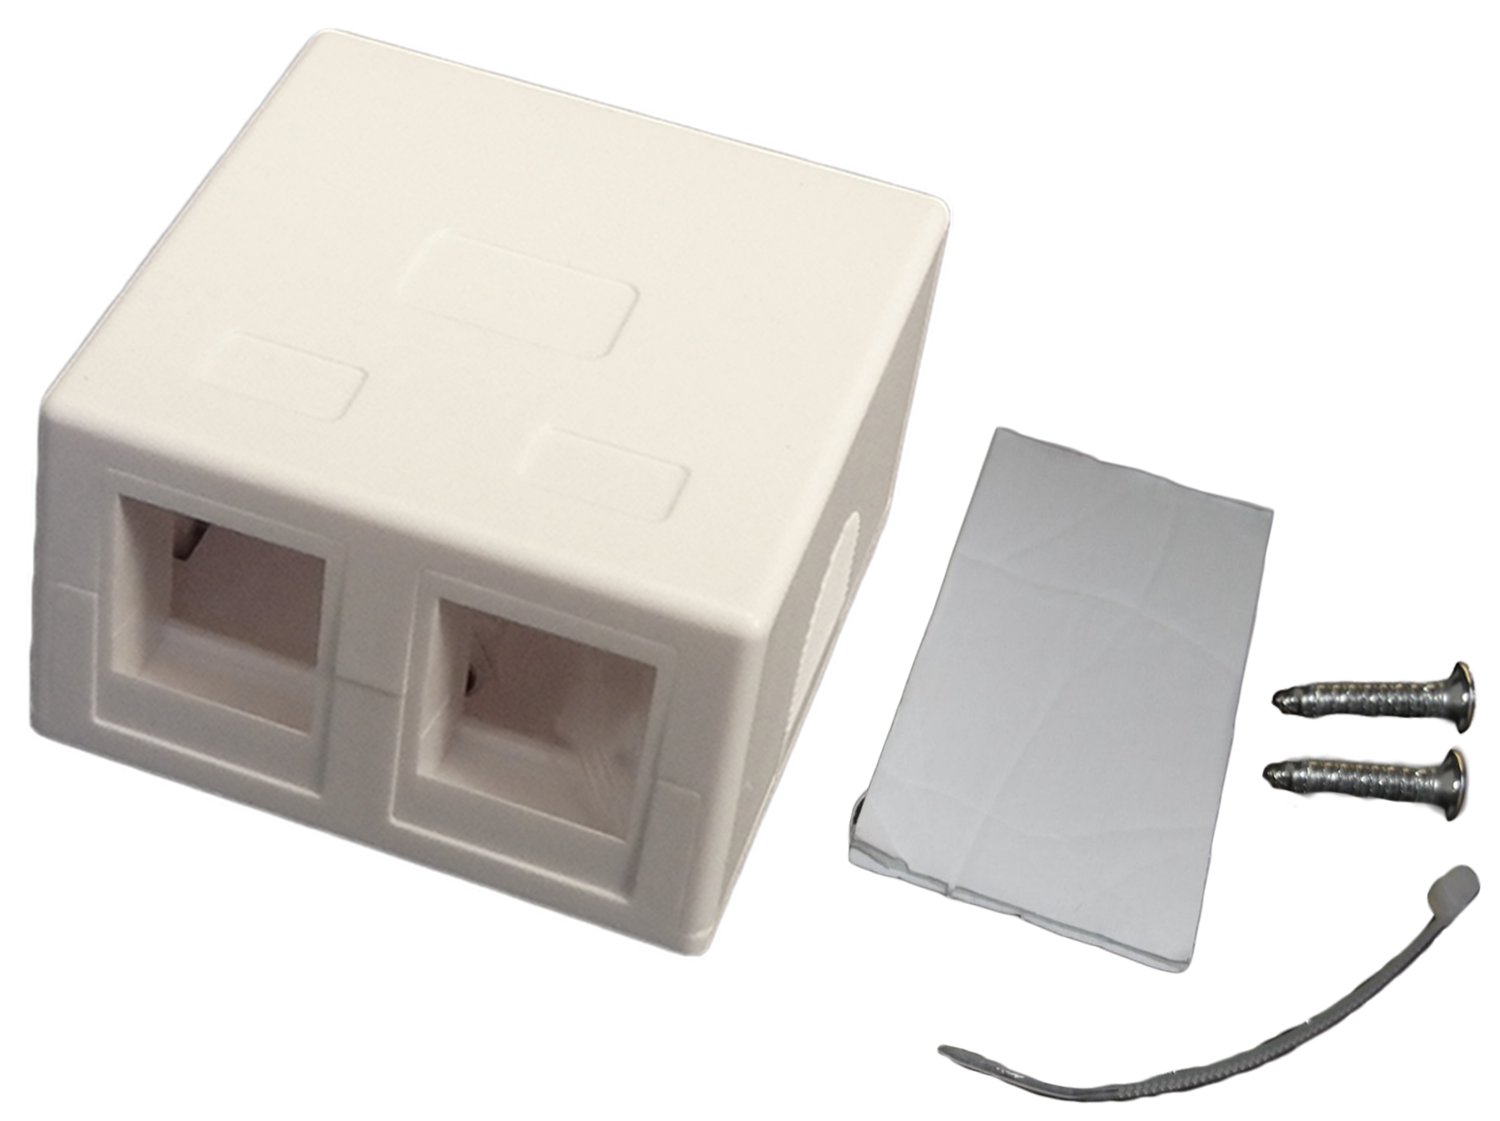 2 Port Surface Mount Box for Keystone Jacks -Easy Mount as low as $.65 each